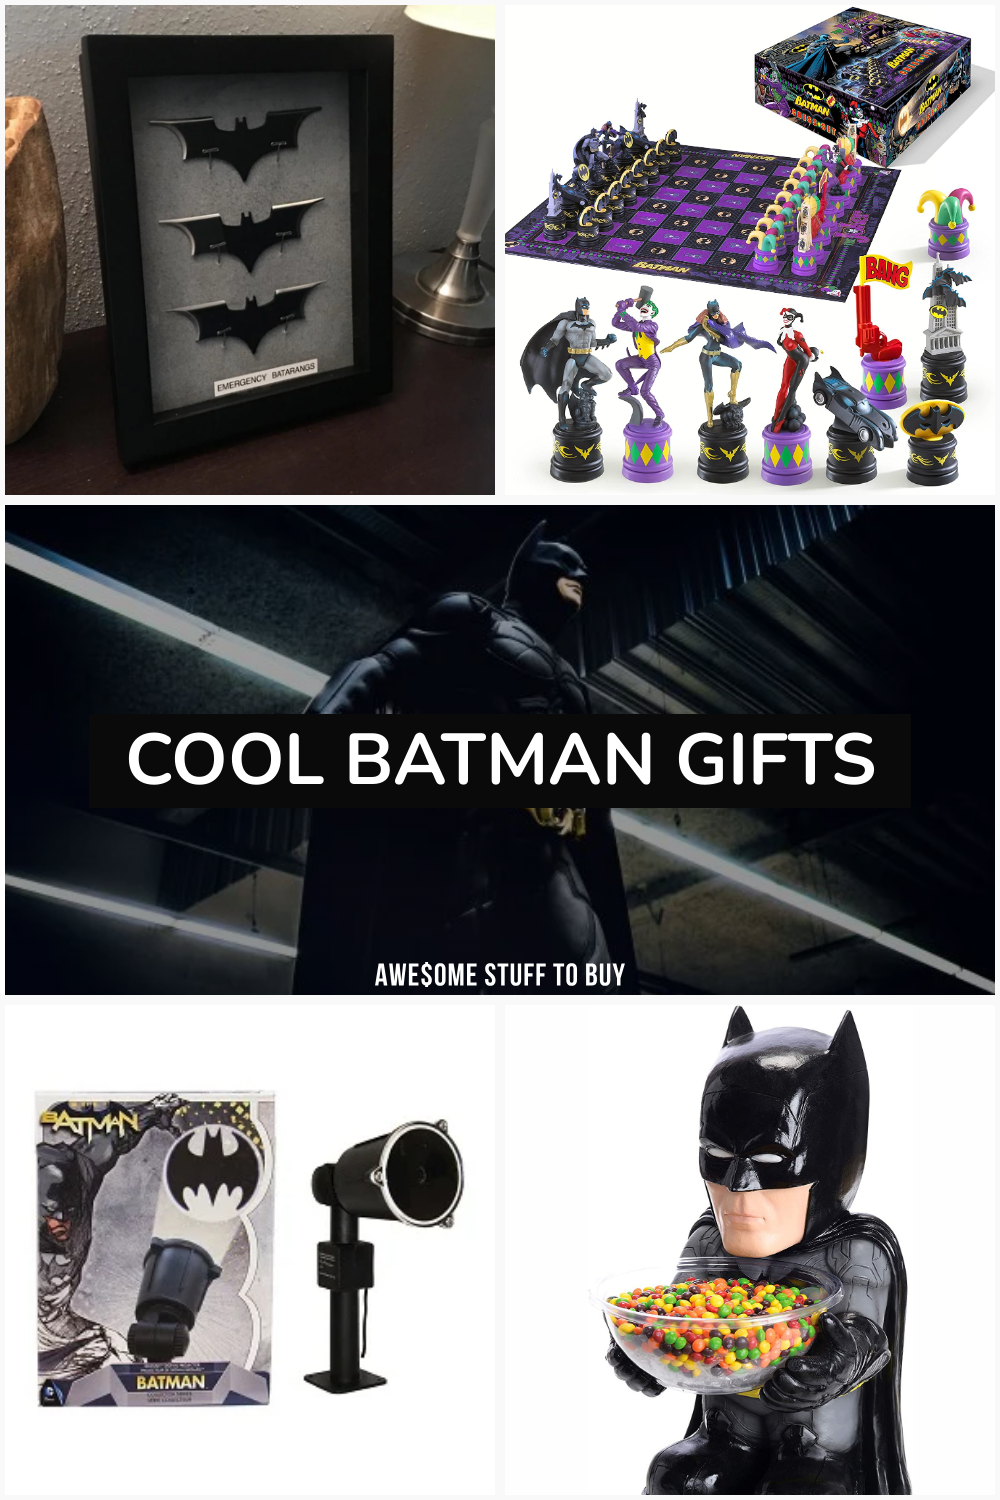 Batman Gifts // Awesome Stuff to Buy